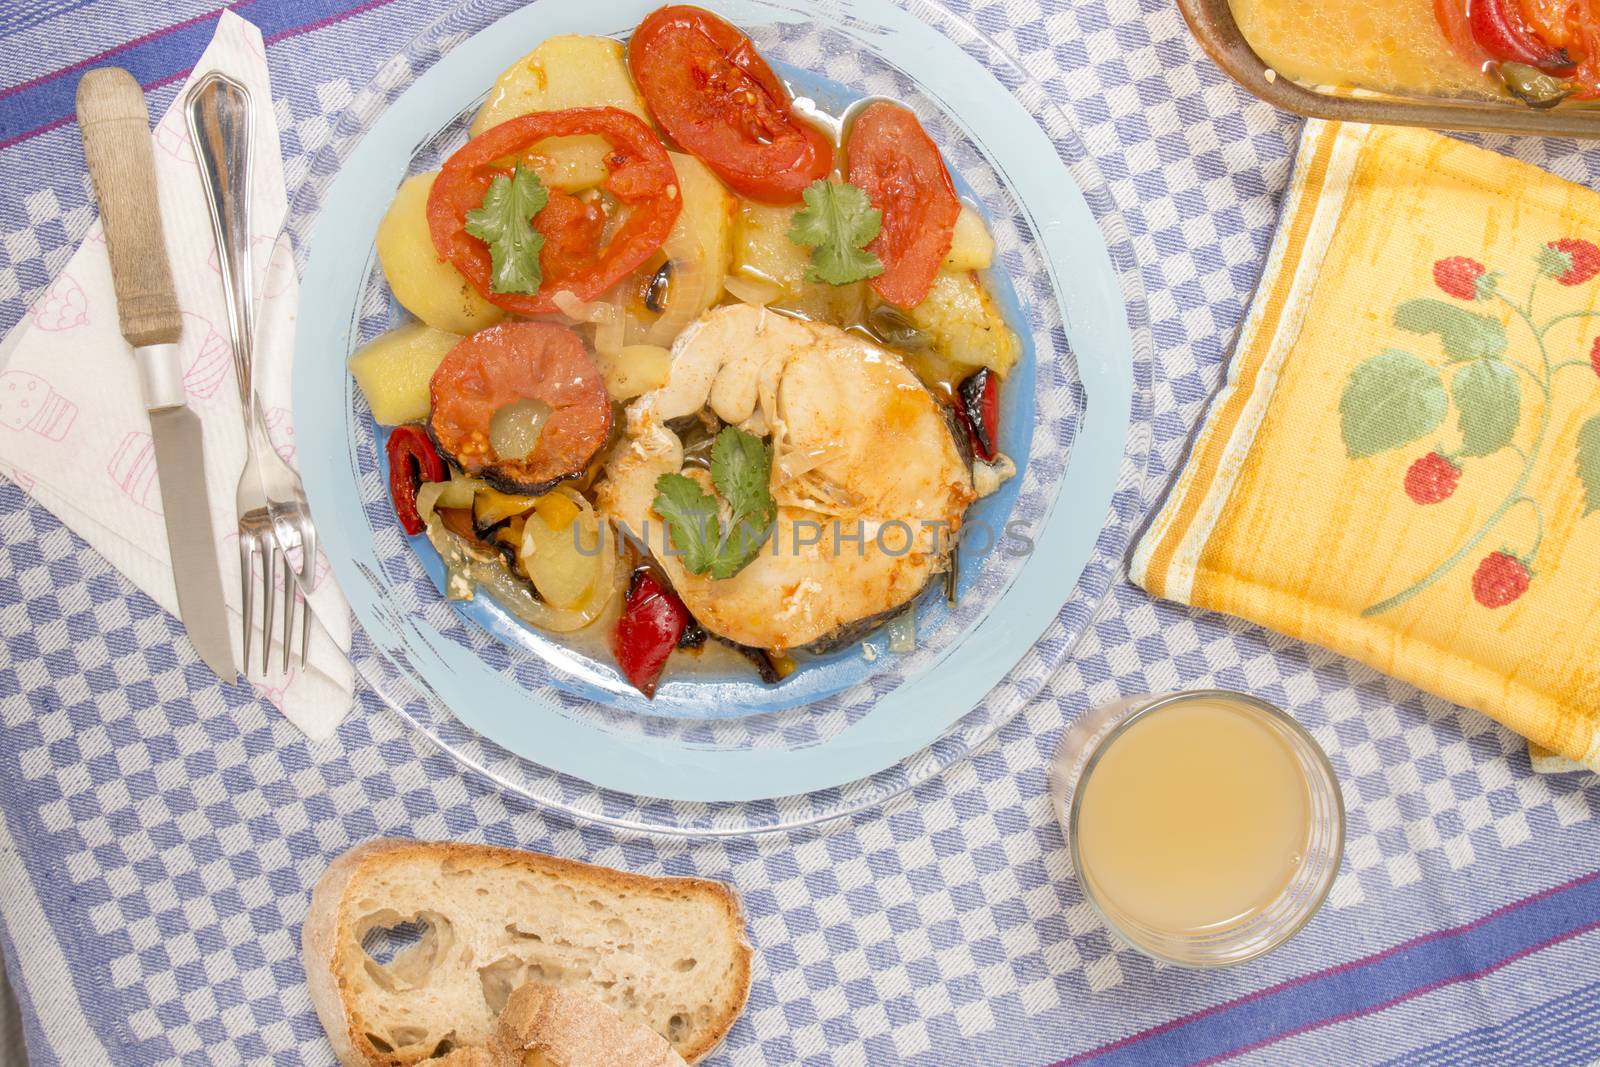 Traditional portuguese meal of fish with potatoes and tomato, made on the oven.